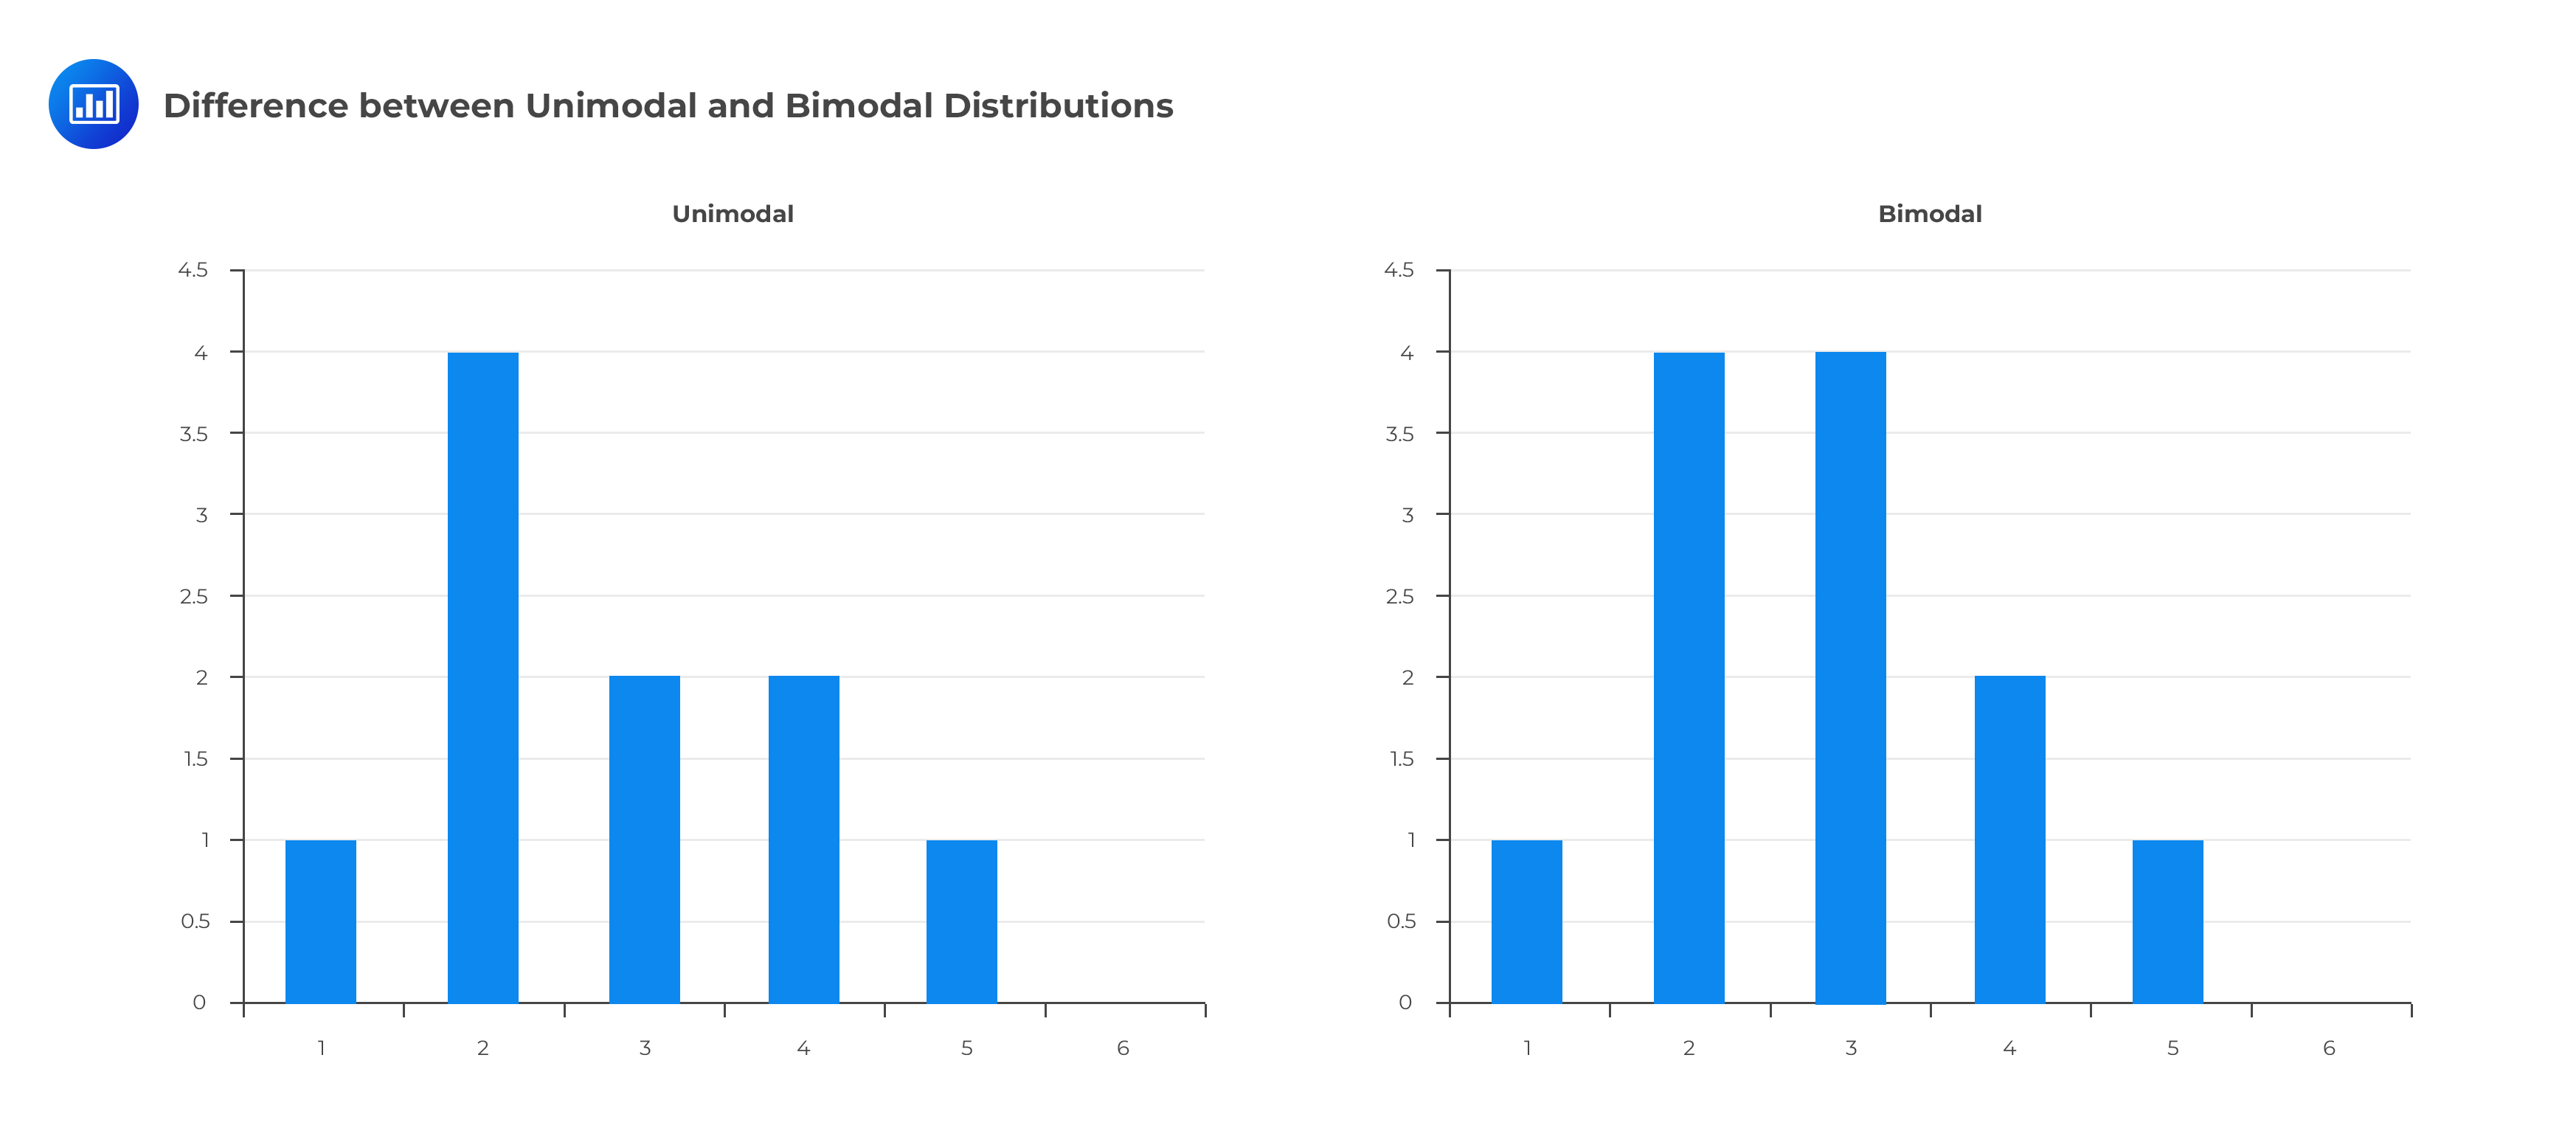 Difference between Unimodal and Bimodal Distributions